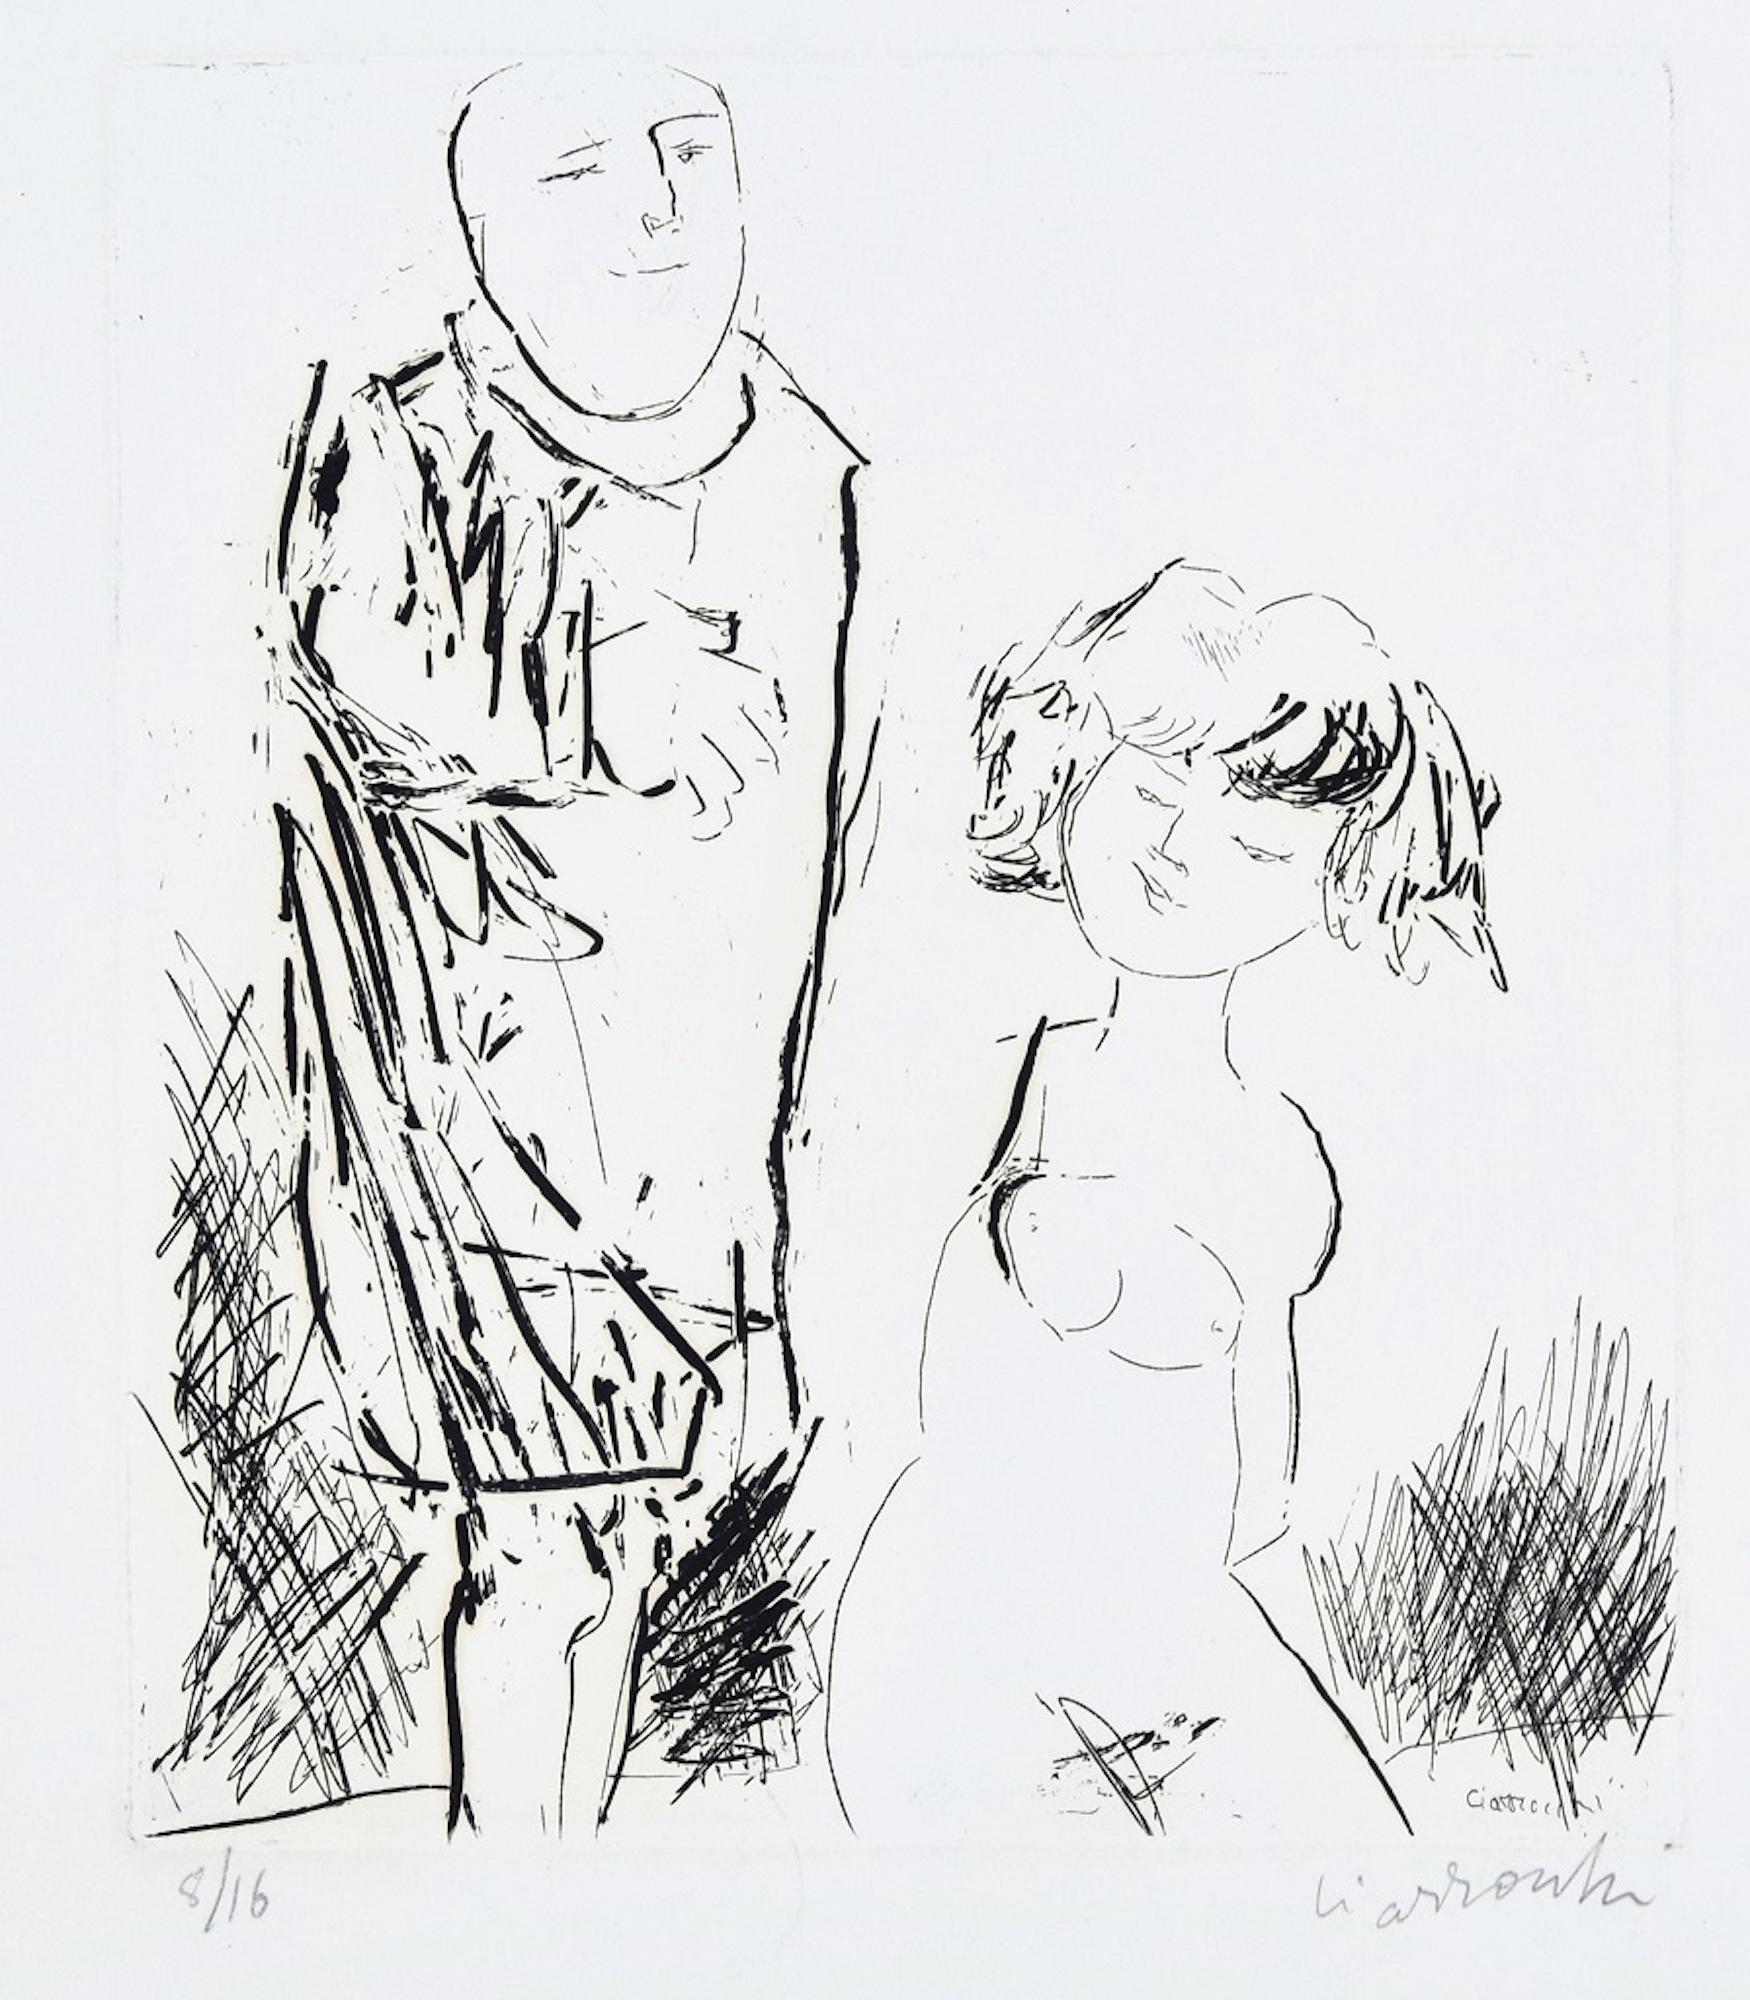 The Couple - Original Etching by by A. Ciarrocchi - 1970 ca.